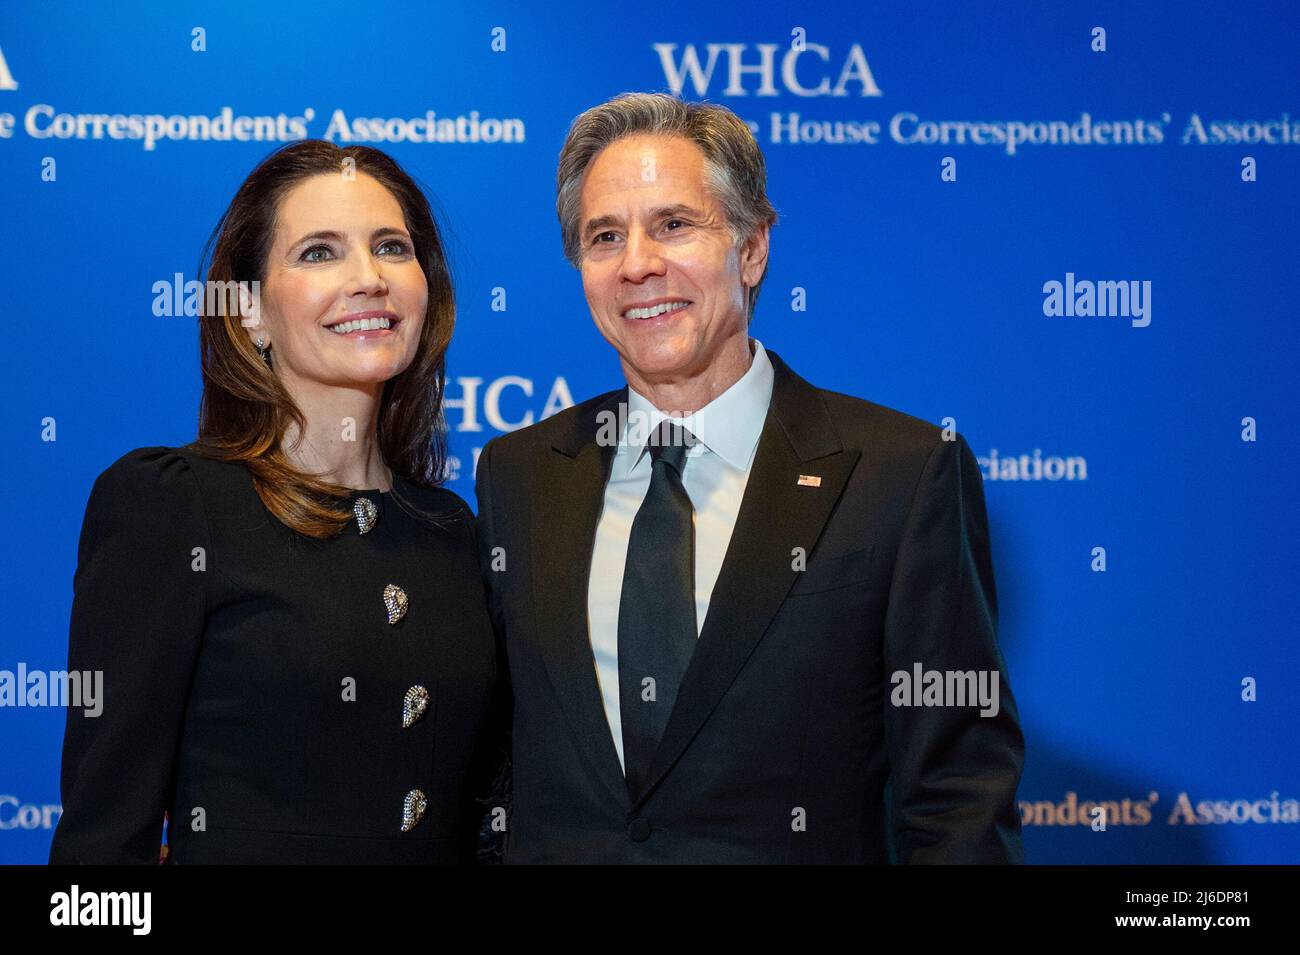 Evan Ryan, left, and Antony Blinken arrive for the 2022 White House Correspondents Association Annual Dinner at the Washington Hilton Hotel on Saturday, April 30, 2022. This is the first time since 2019 that the WHCA has held its annual dinner due to the COVID-19 pandemic. Credit: Rod Lamkey / CNP Stock Photo